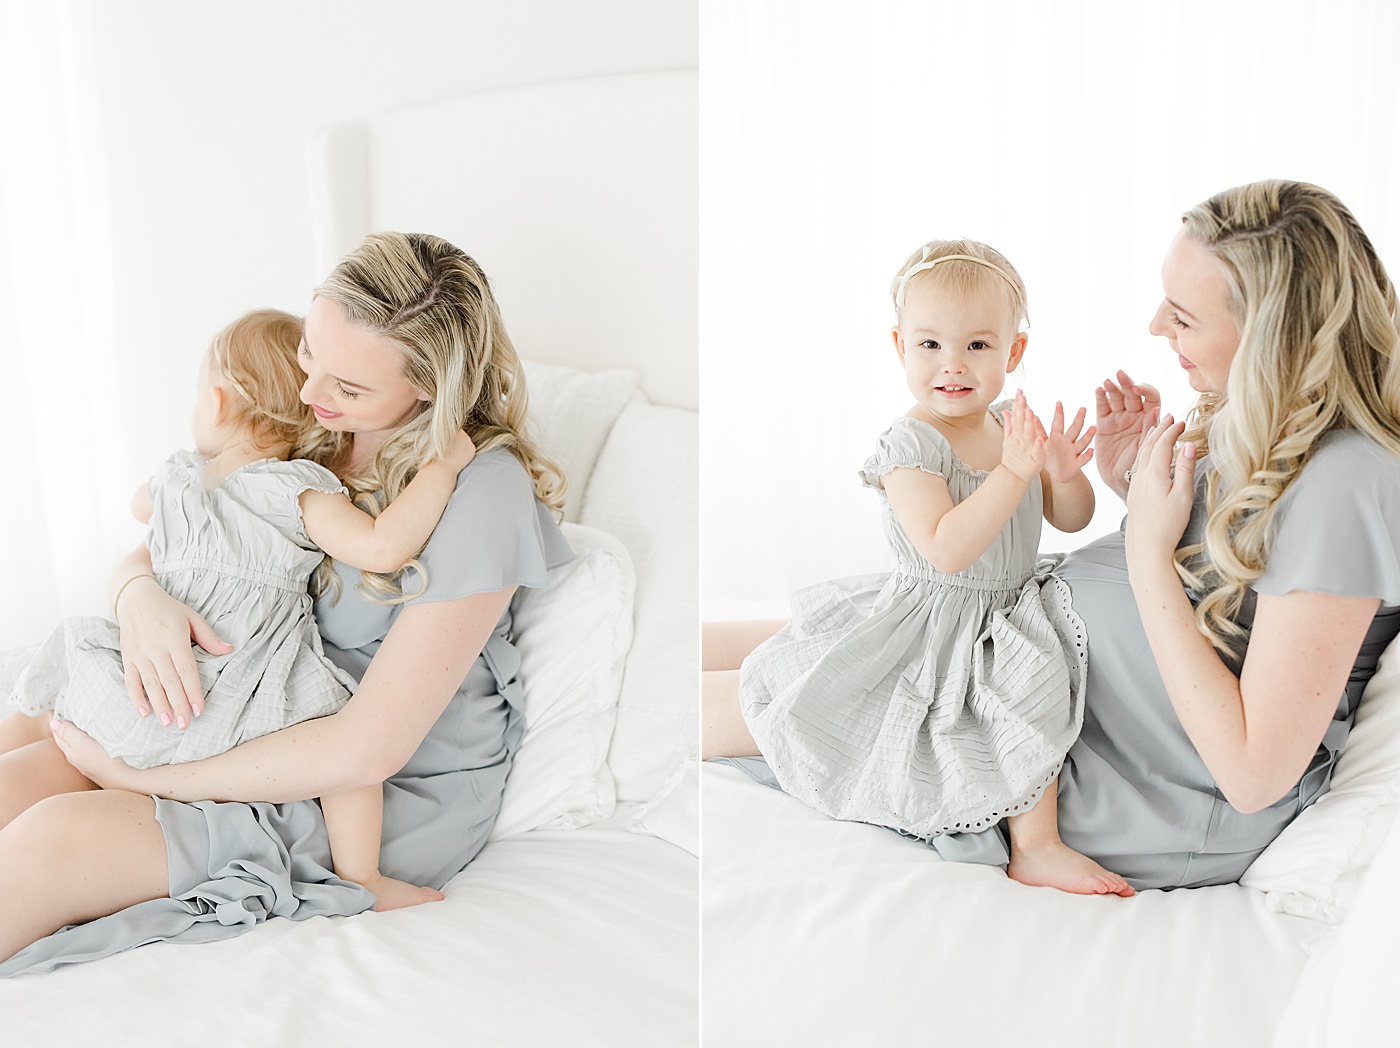 5 Reasons Why You Should Take Maternity Photos | Expecting mother sitting on bed holding her toddler | Kristin Wood Photography